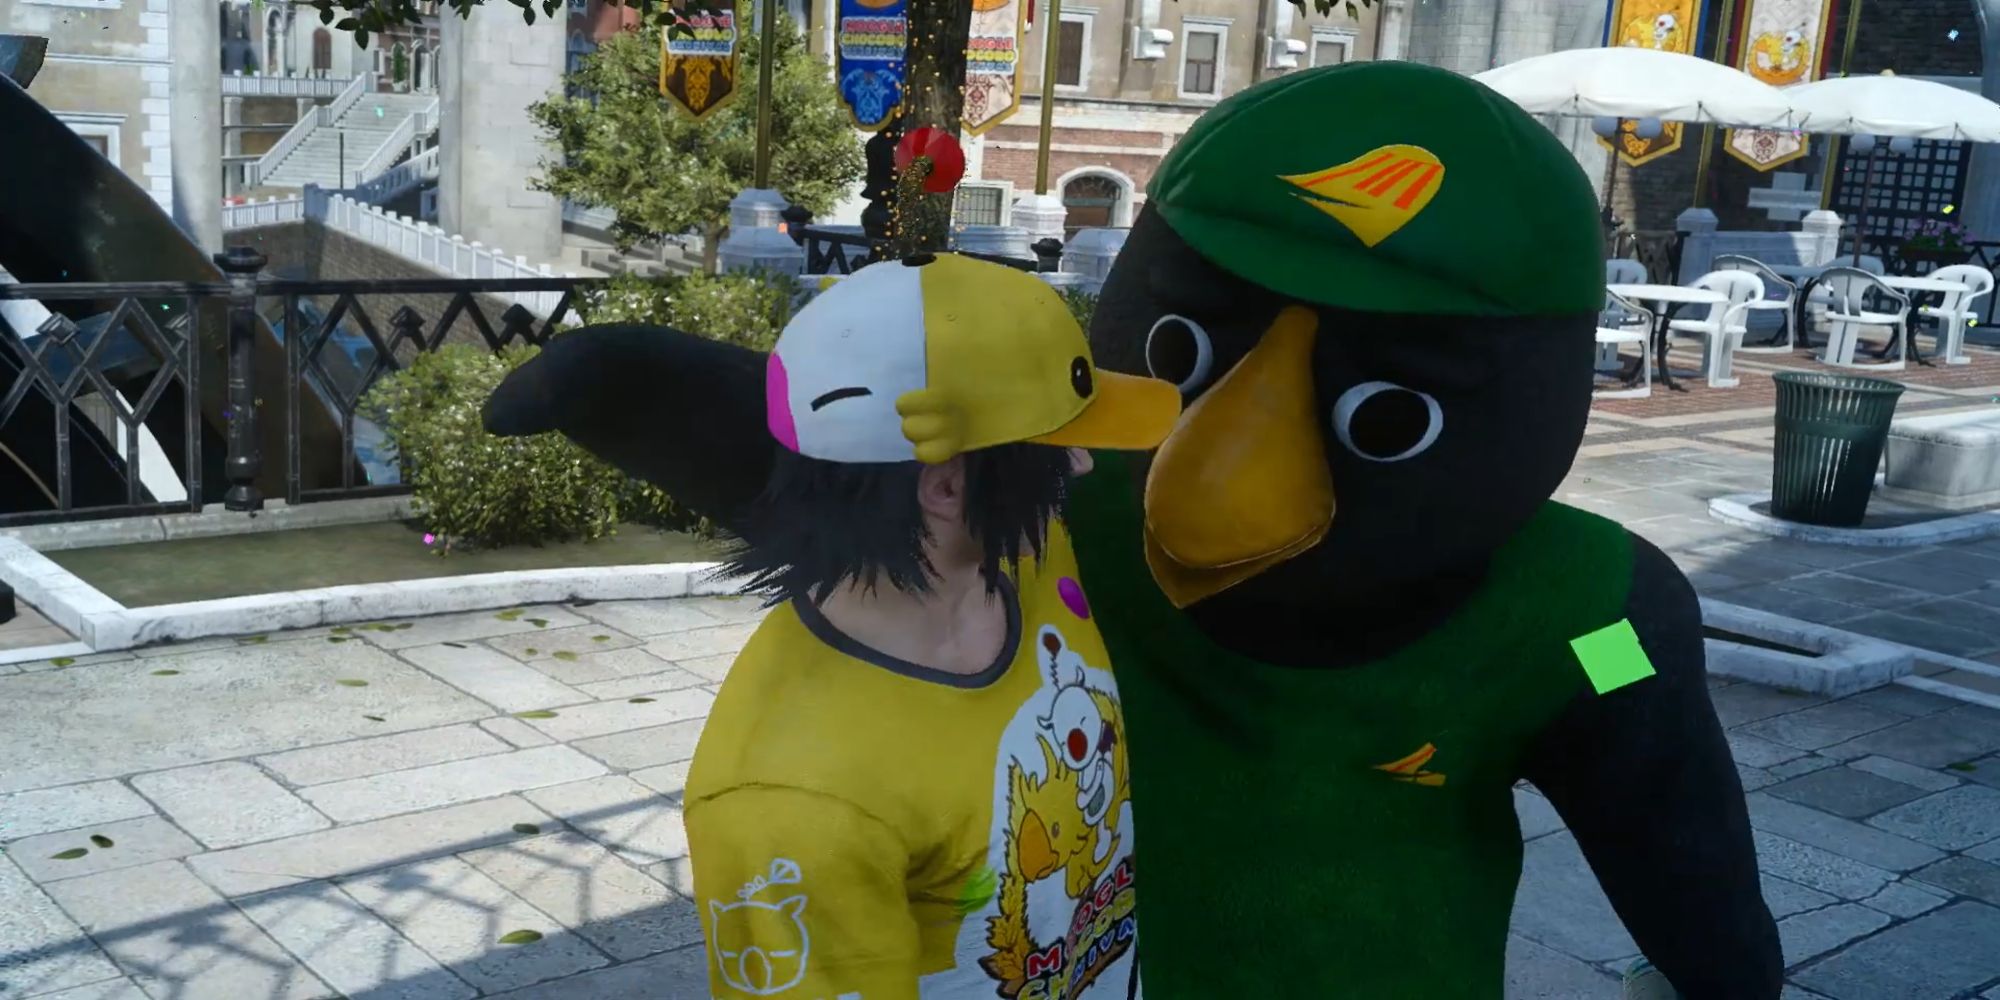 Kenny Crow getting a picture with characters from FF15